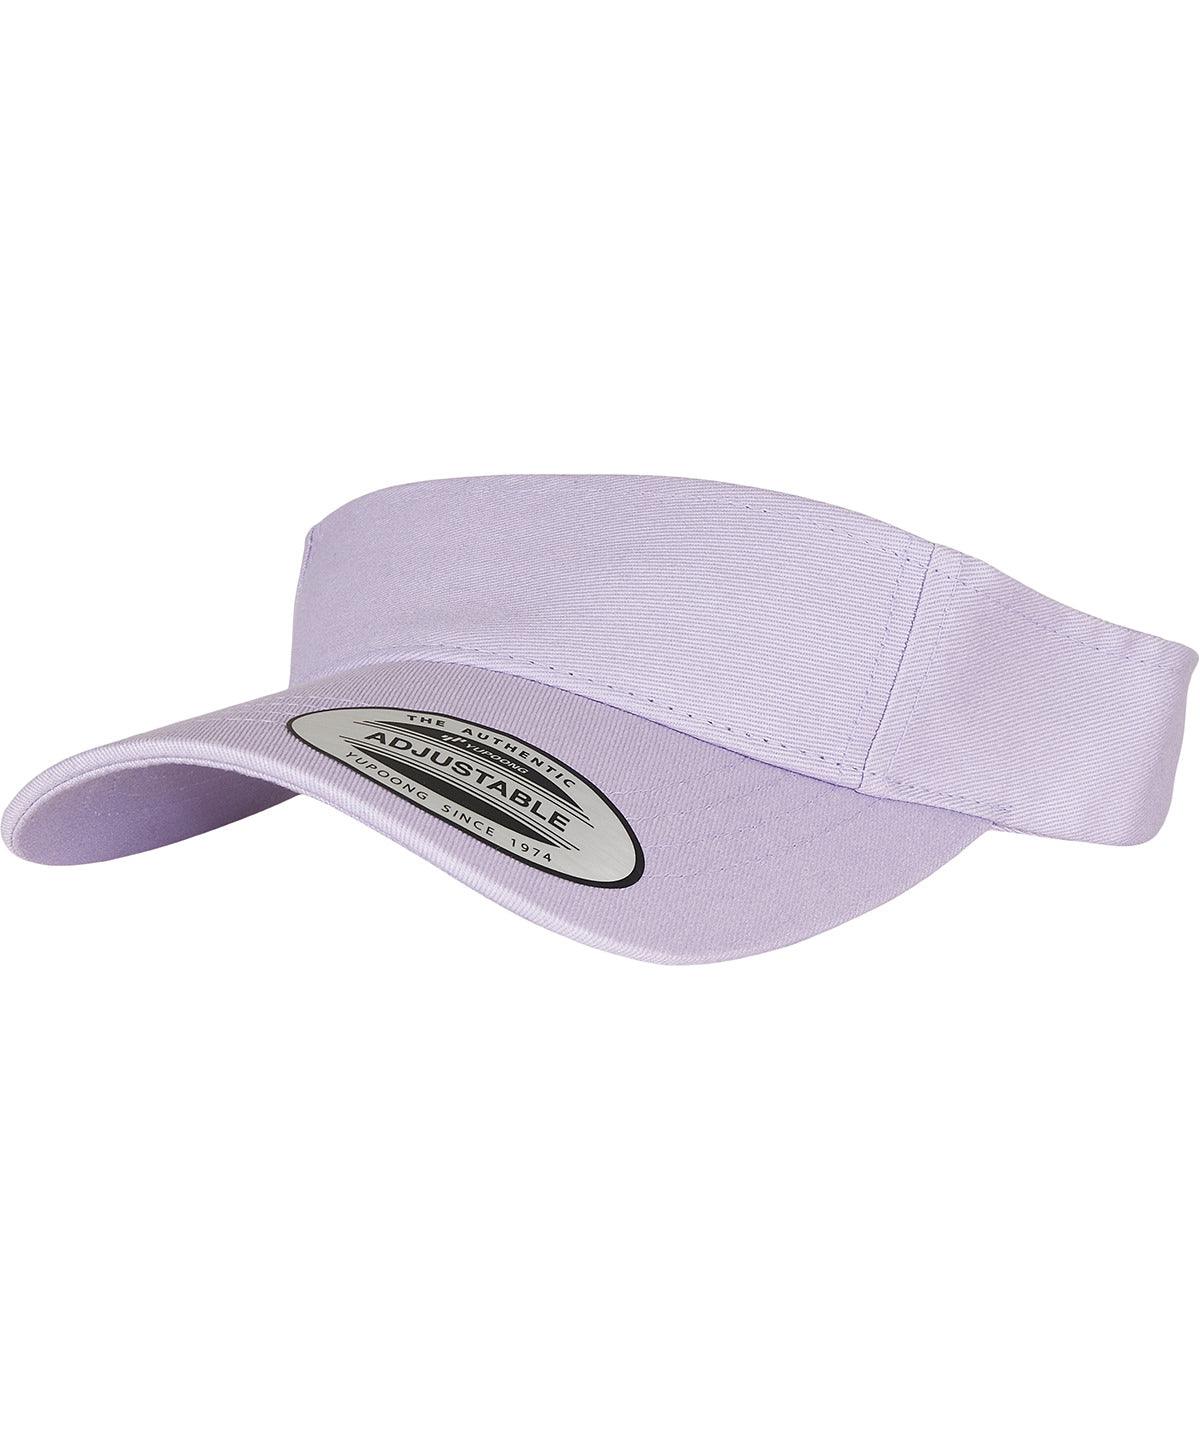 (8888) - Curved by Yupoong Colours cap visor 2022Rebrandable Lilac For Flexfit HeadwearNew